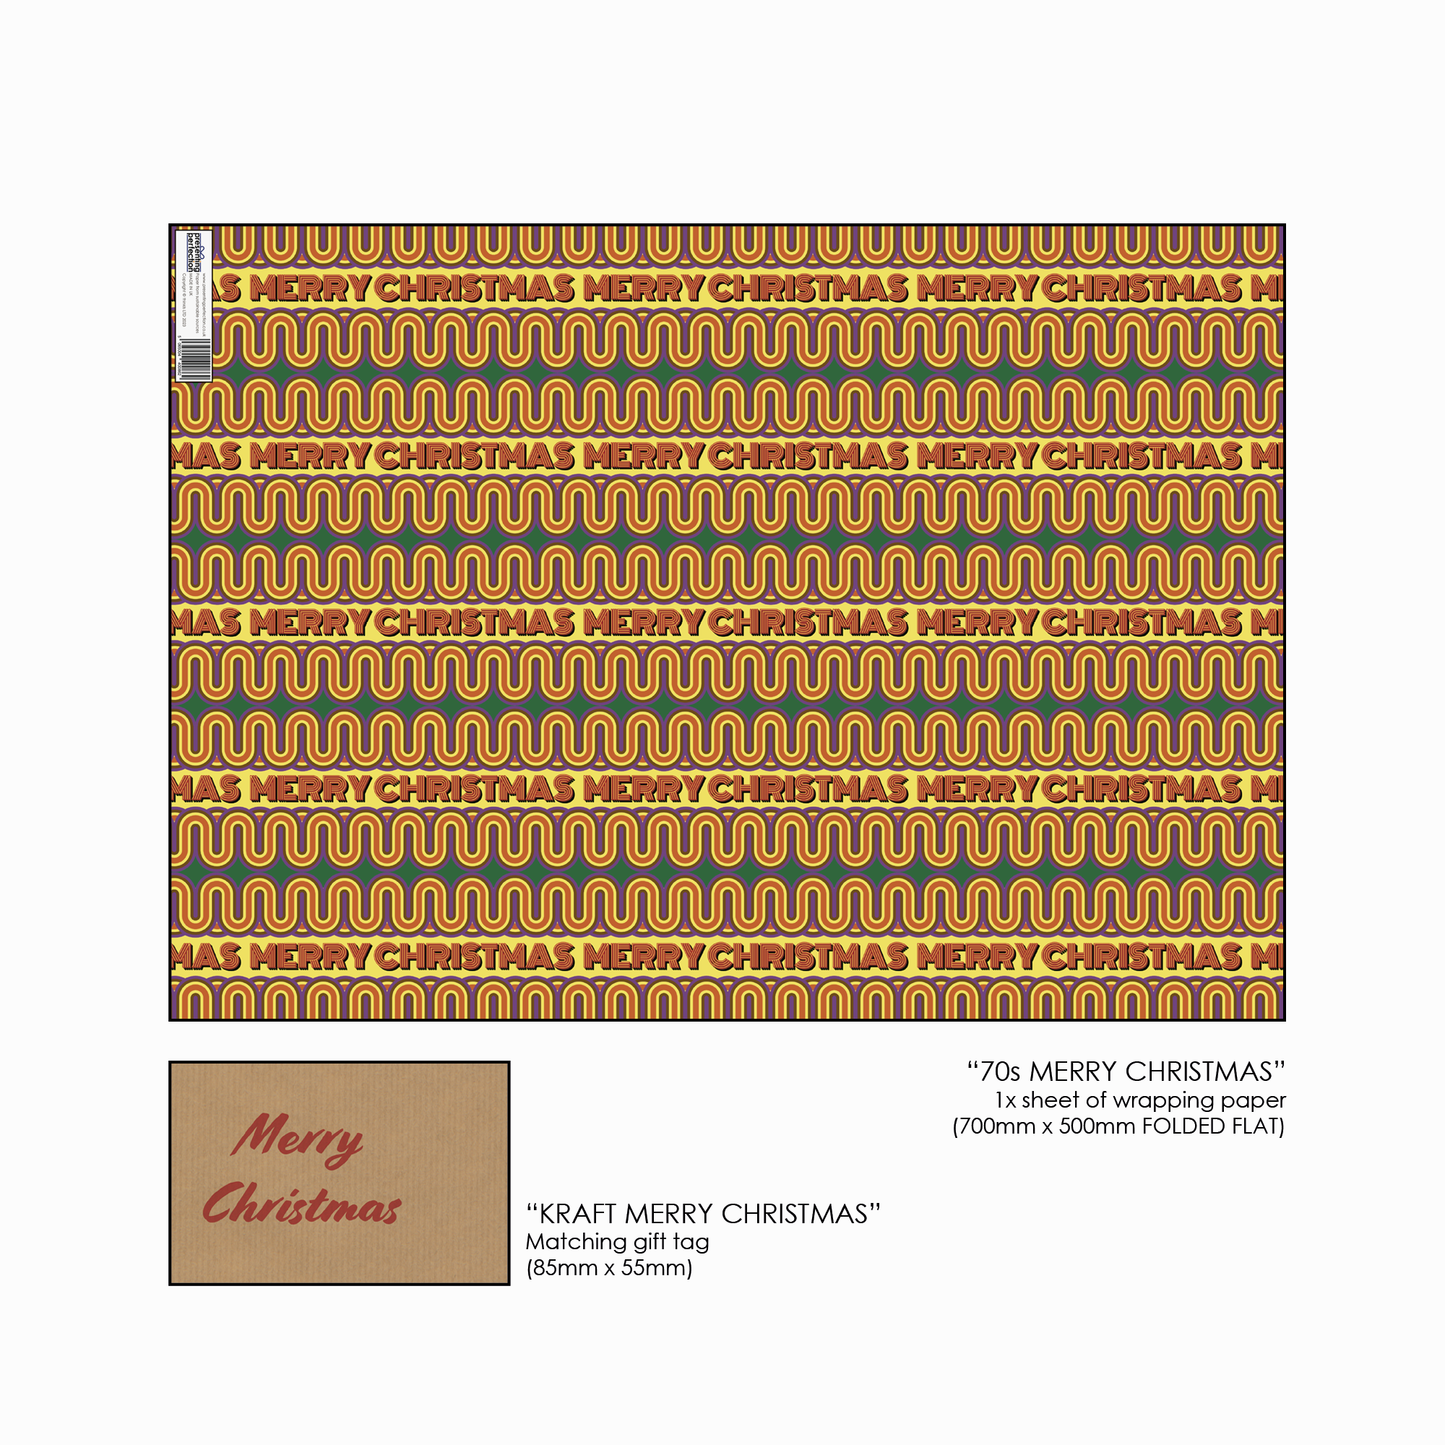 Retro Christmas Wrapping Paper and Matching Gift Tag